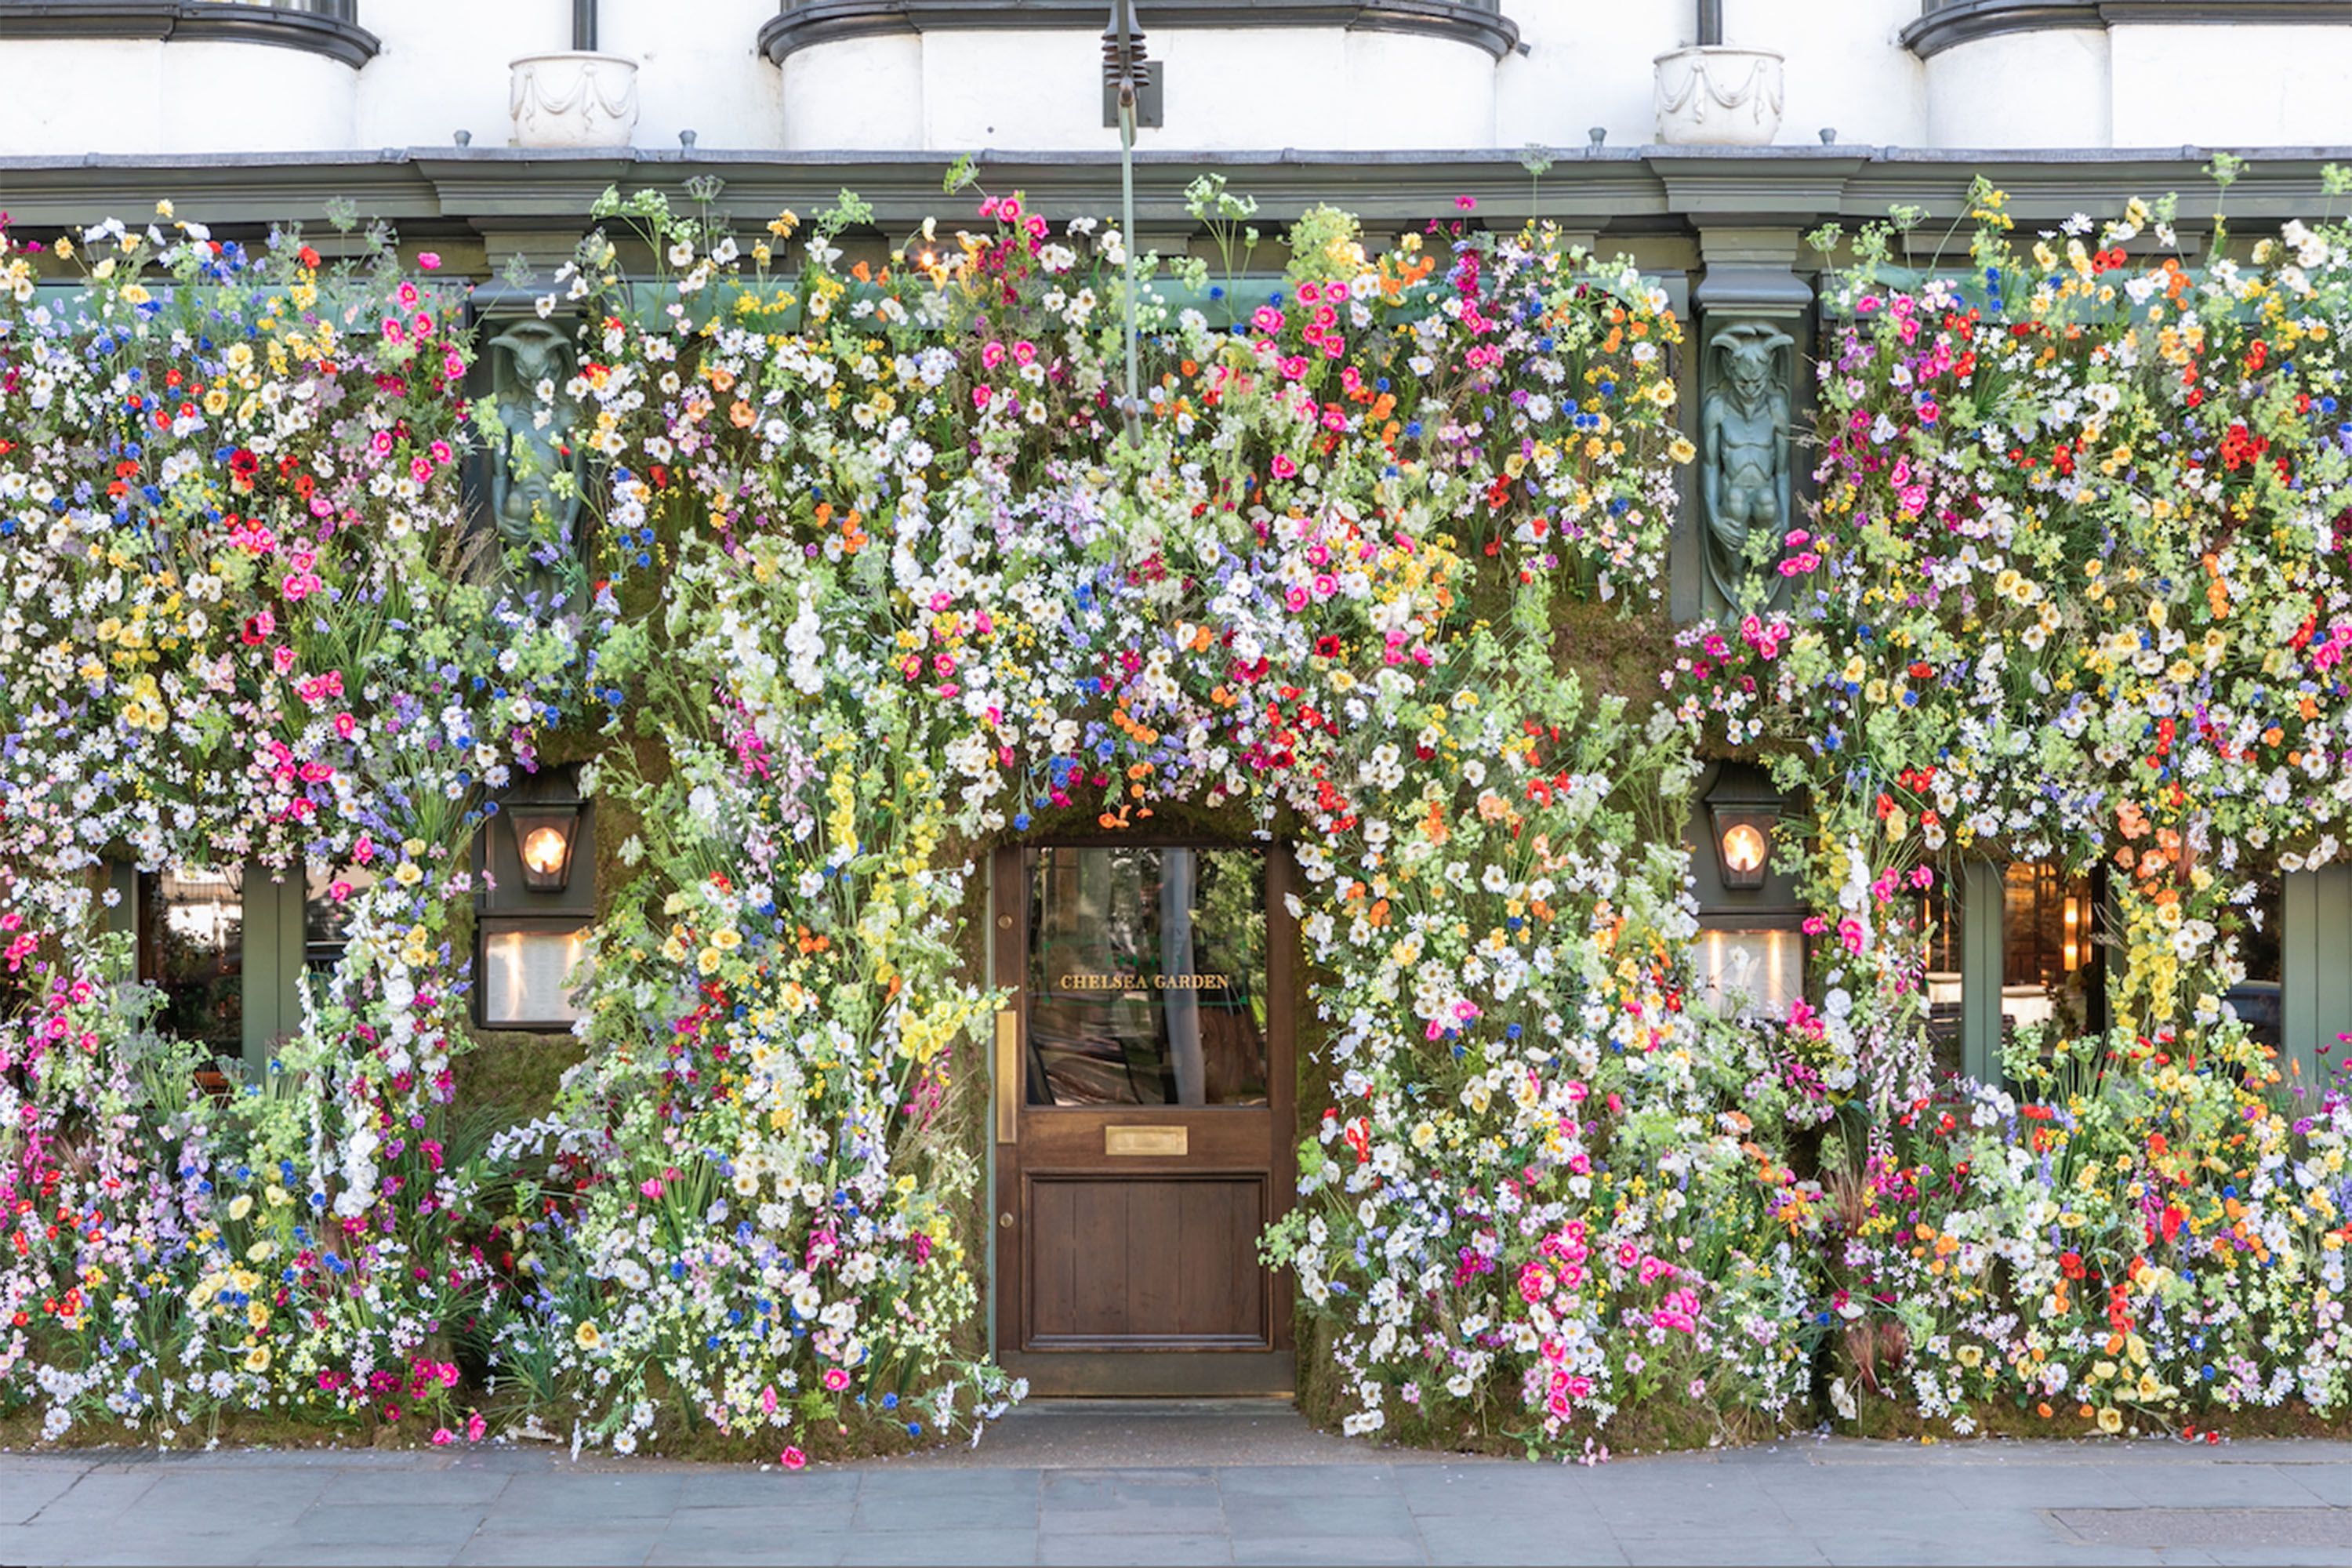 How to enjoy the Chelsea Flower Show - bars and restaurants